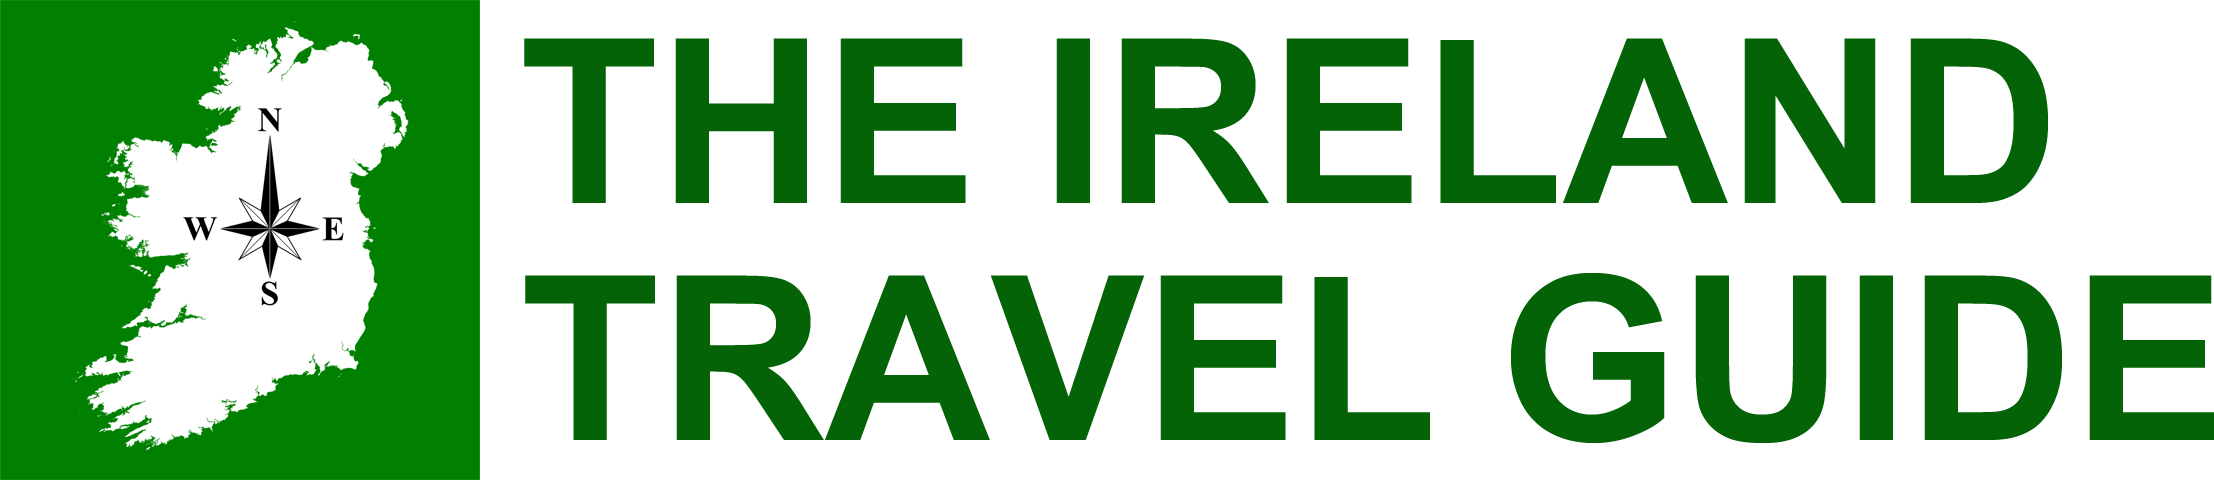 The Ireland Travel Guide - Accommodation - Food and Drink - Shopping - Activities - Transport